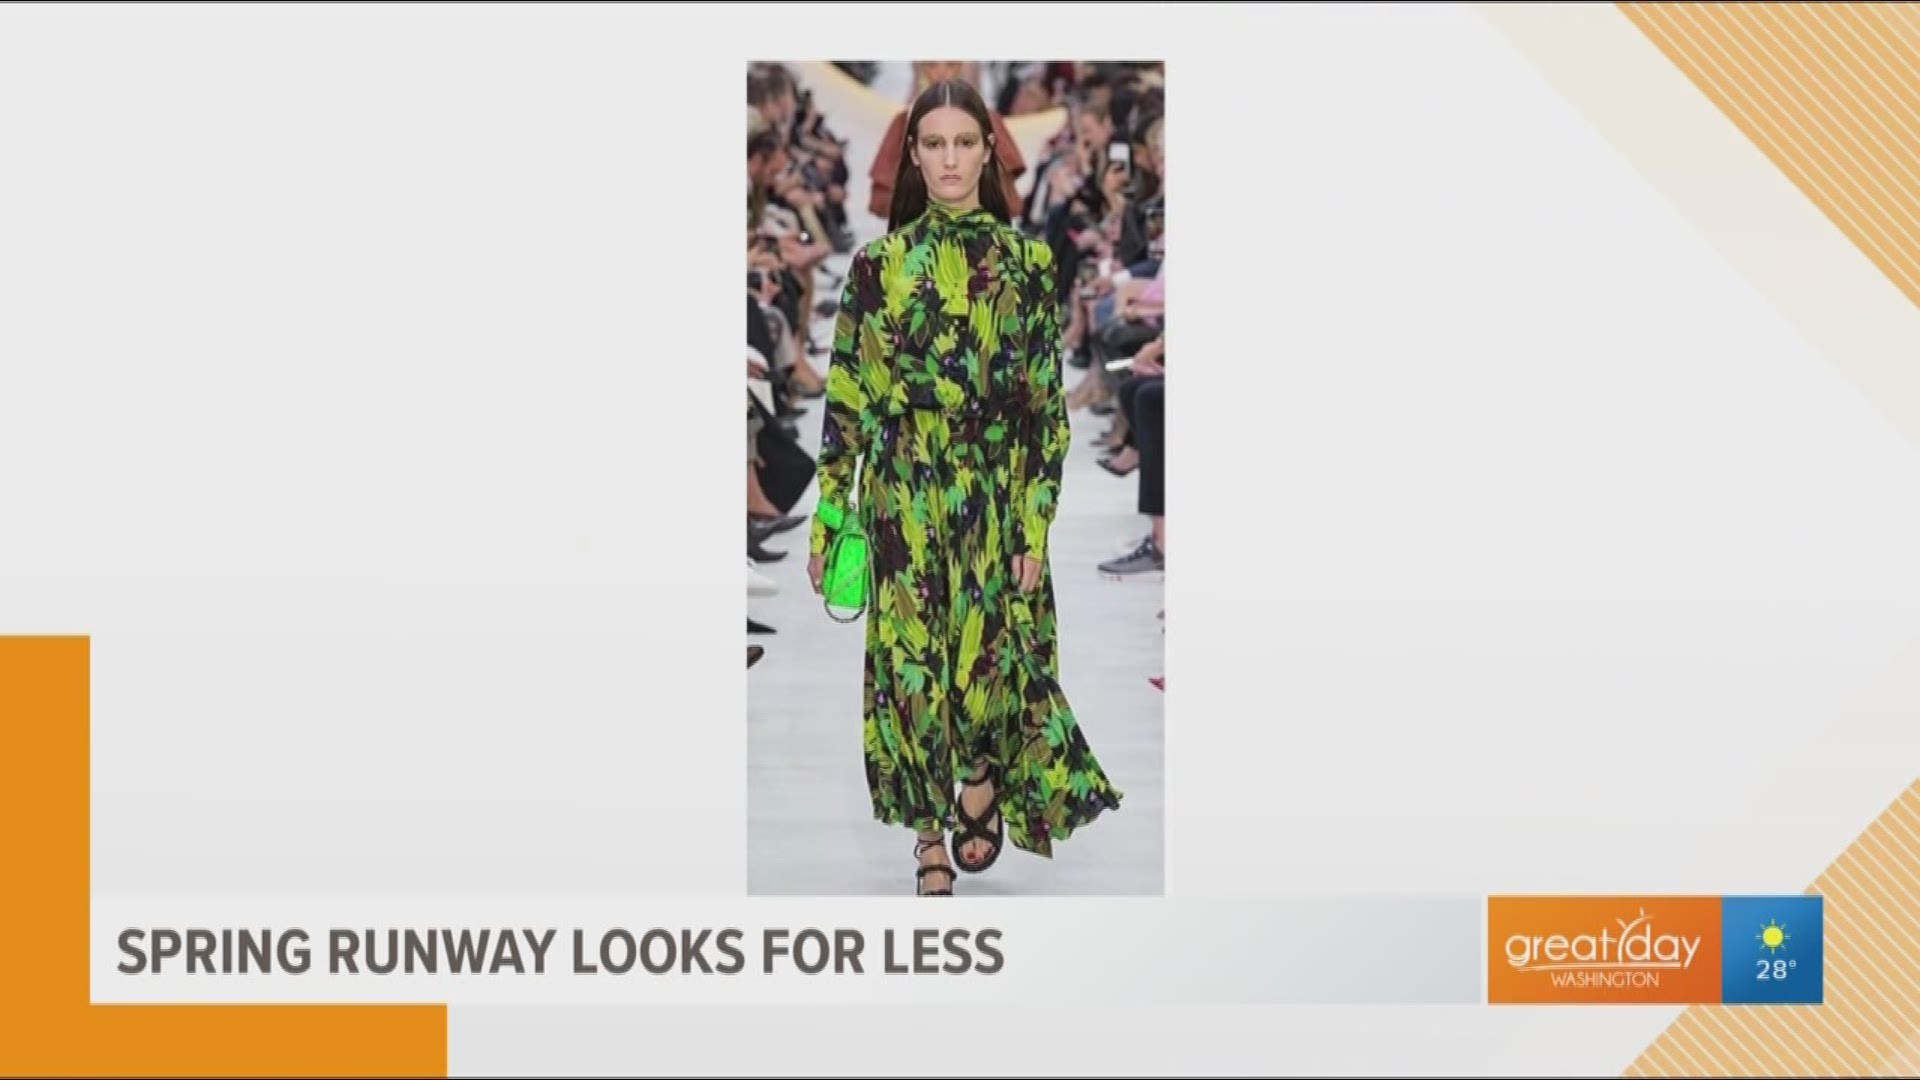 Joy Kingsley-Ibeh, celebrity stylists and founder of the Kingsley Model and Talent Management agency, showed off ways to get the spring runway looks for less.